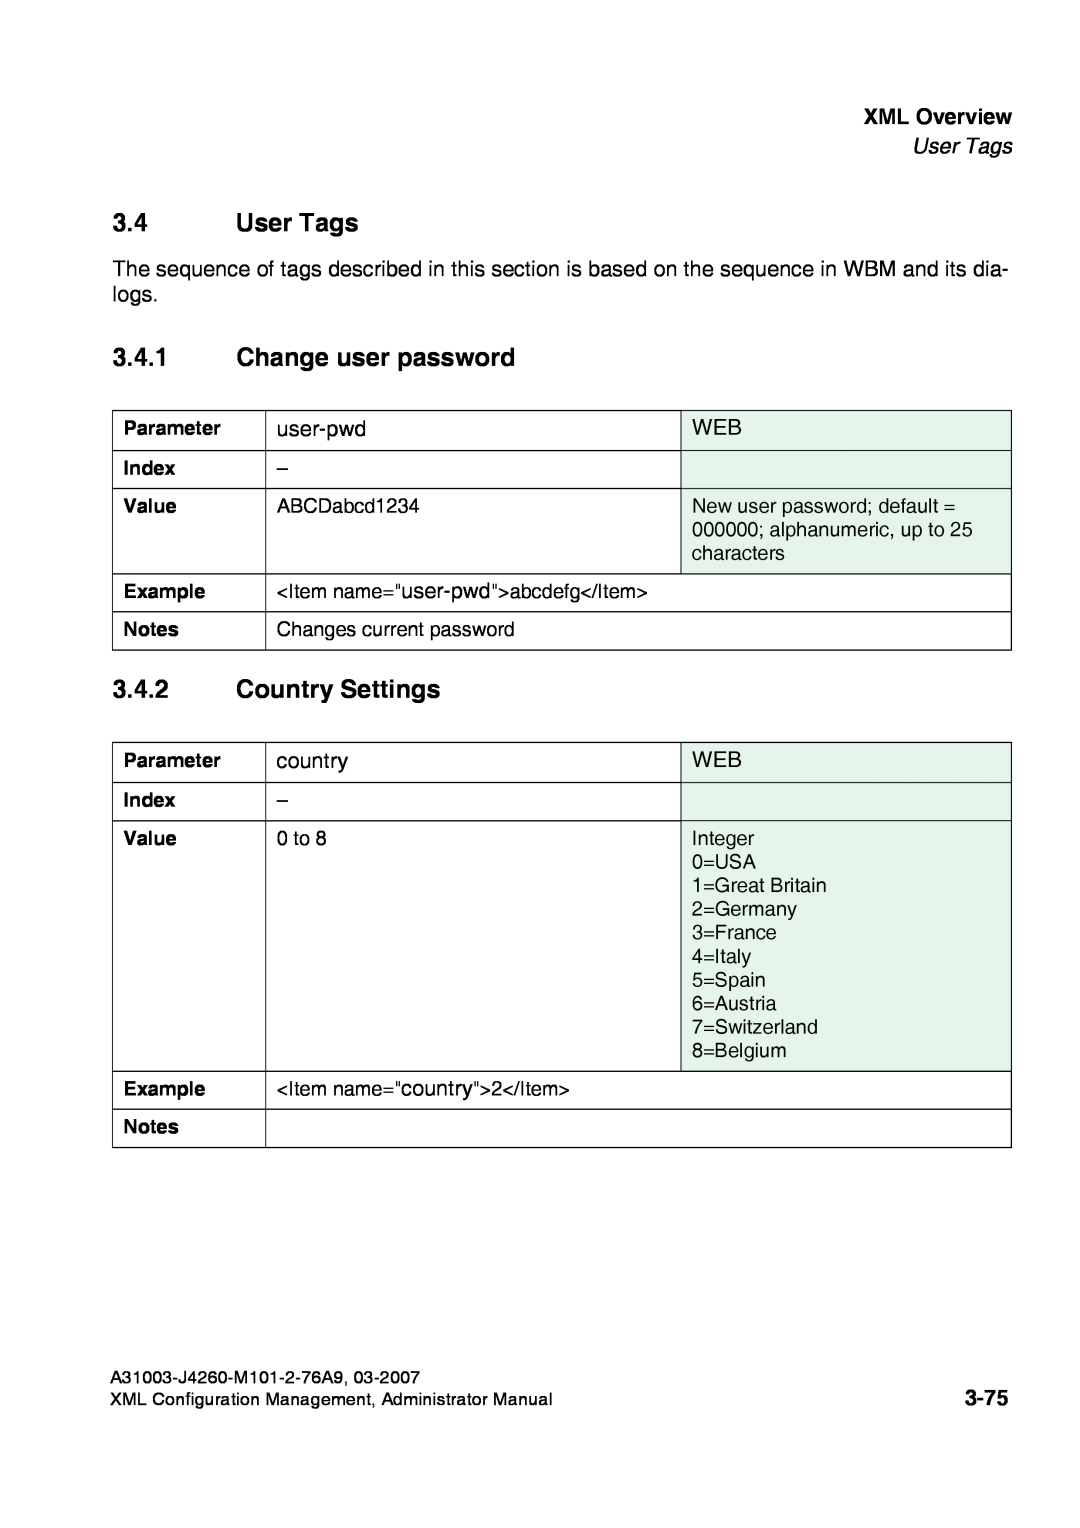 Siemens 410 S V6.0, 420 S V6.0 manual User Tags, Change user password, Country Settings, 3-75, XML Overview 